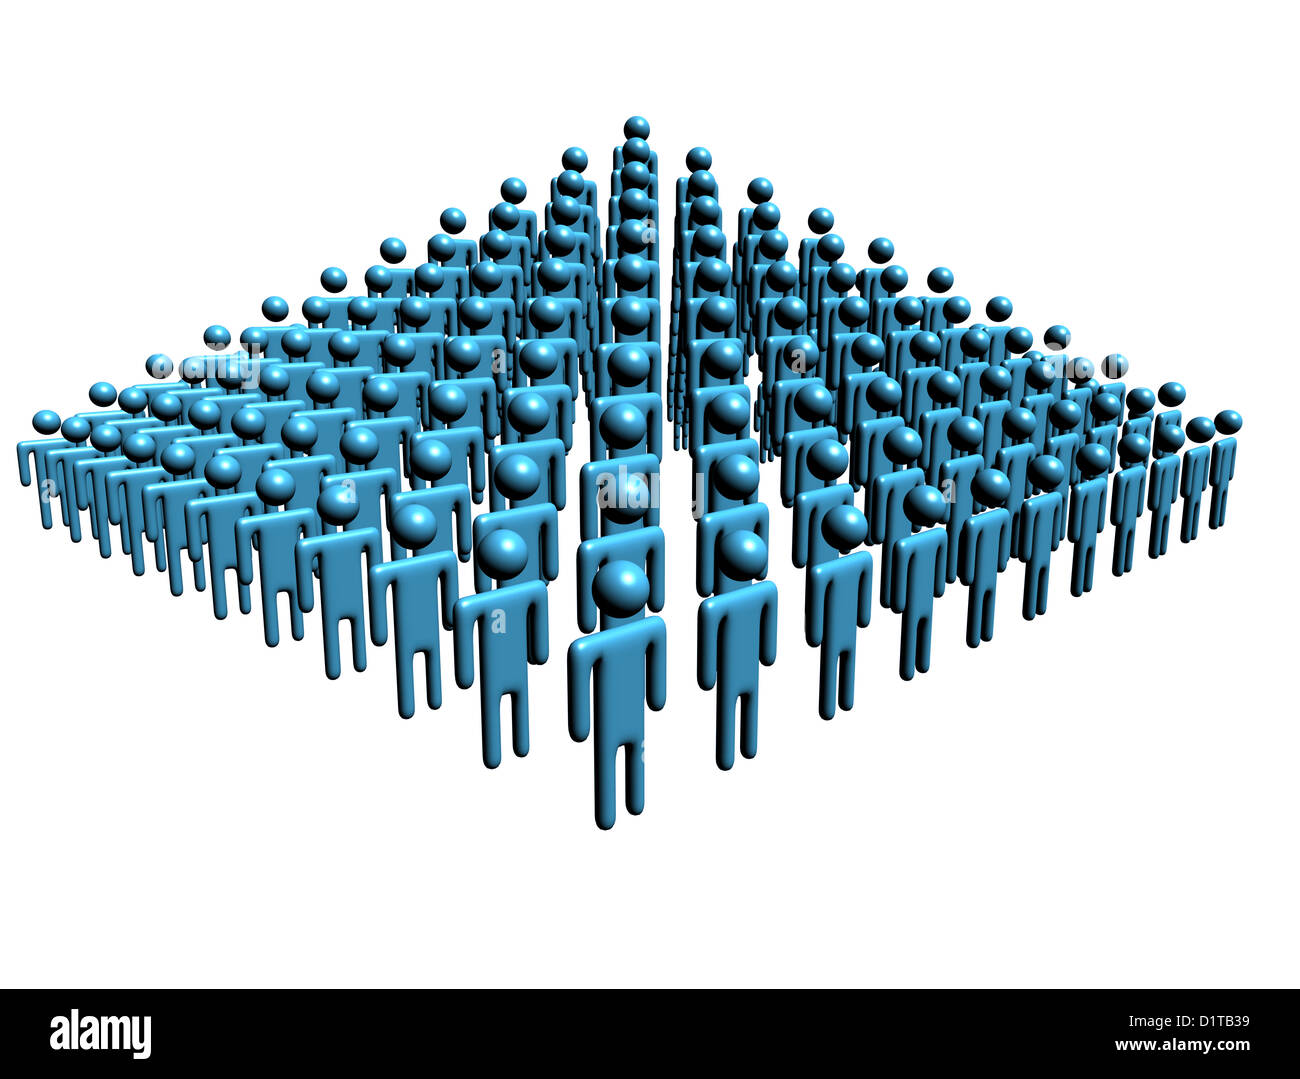 Pyramid of abstract people illustration Stock Photo